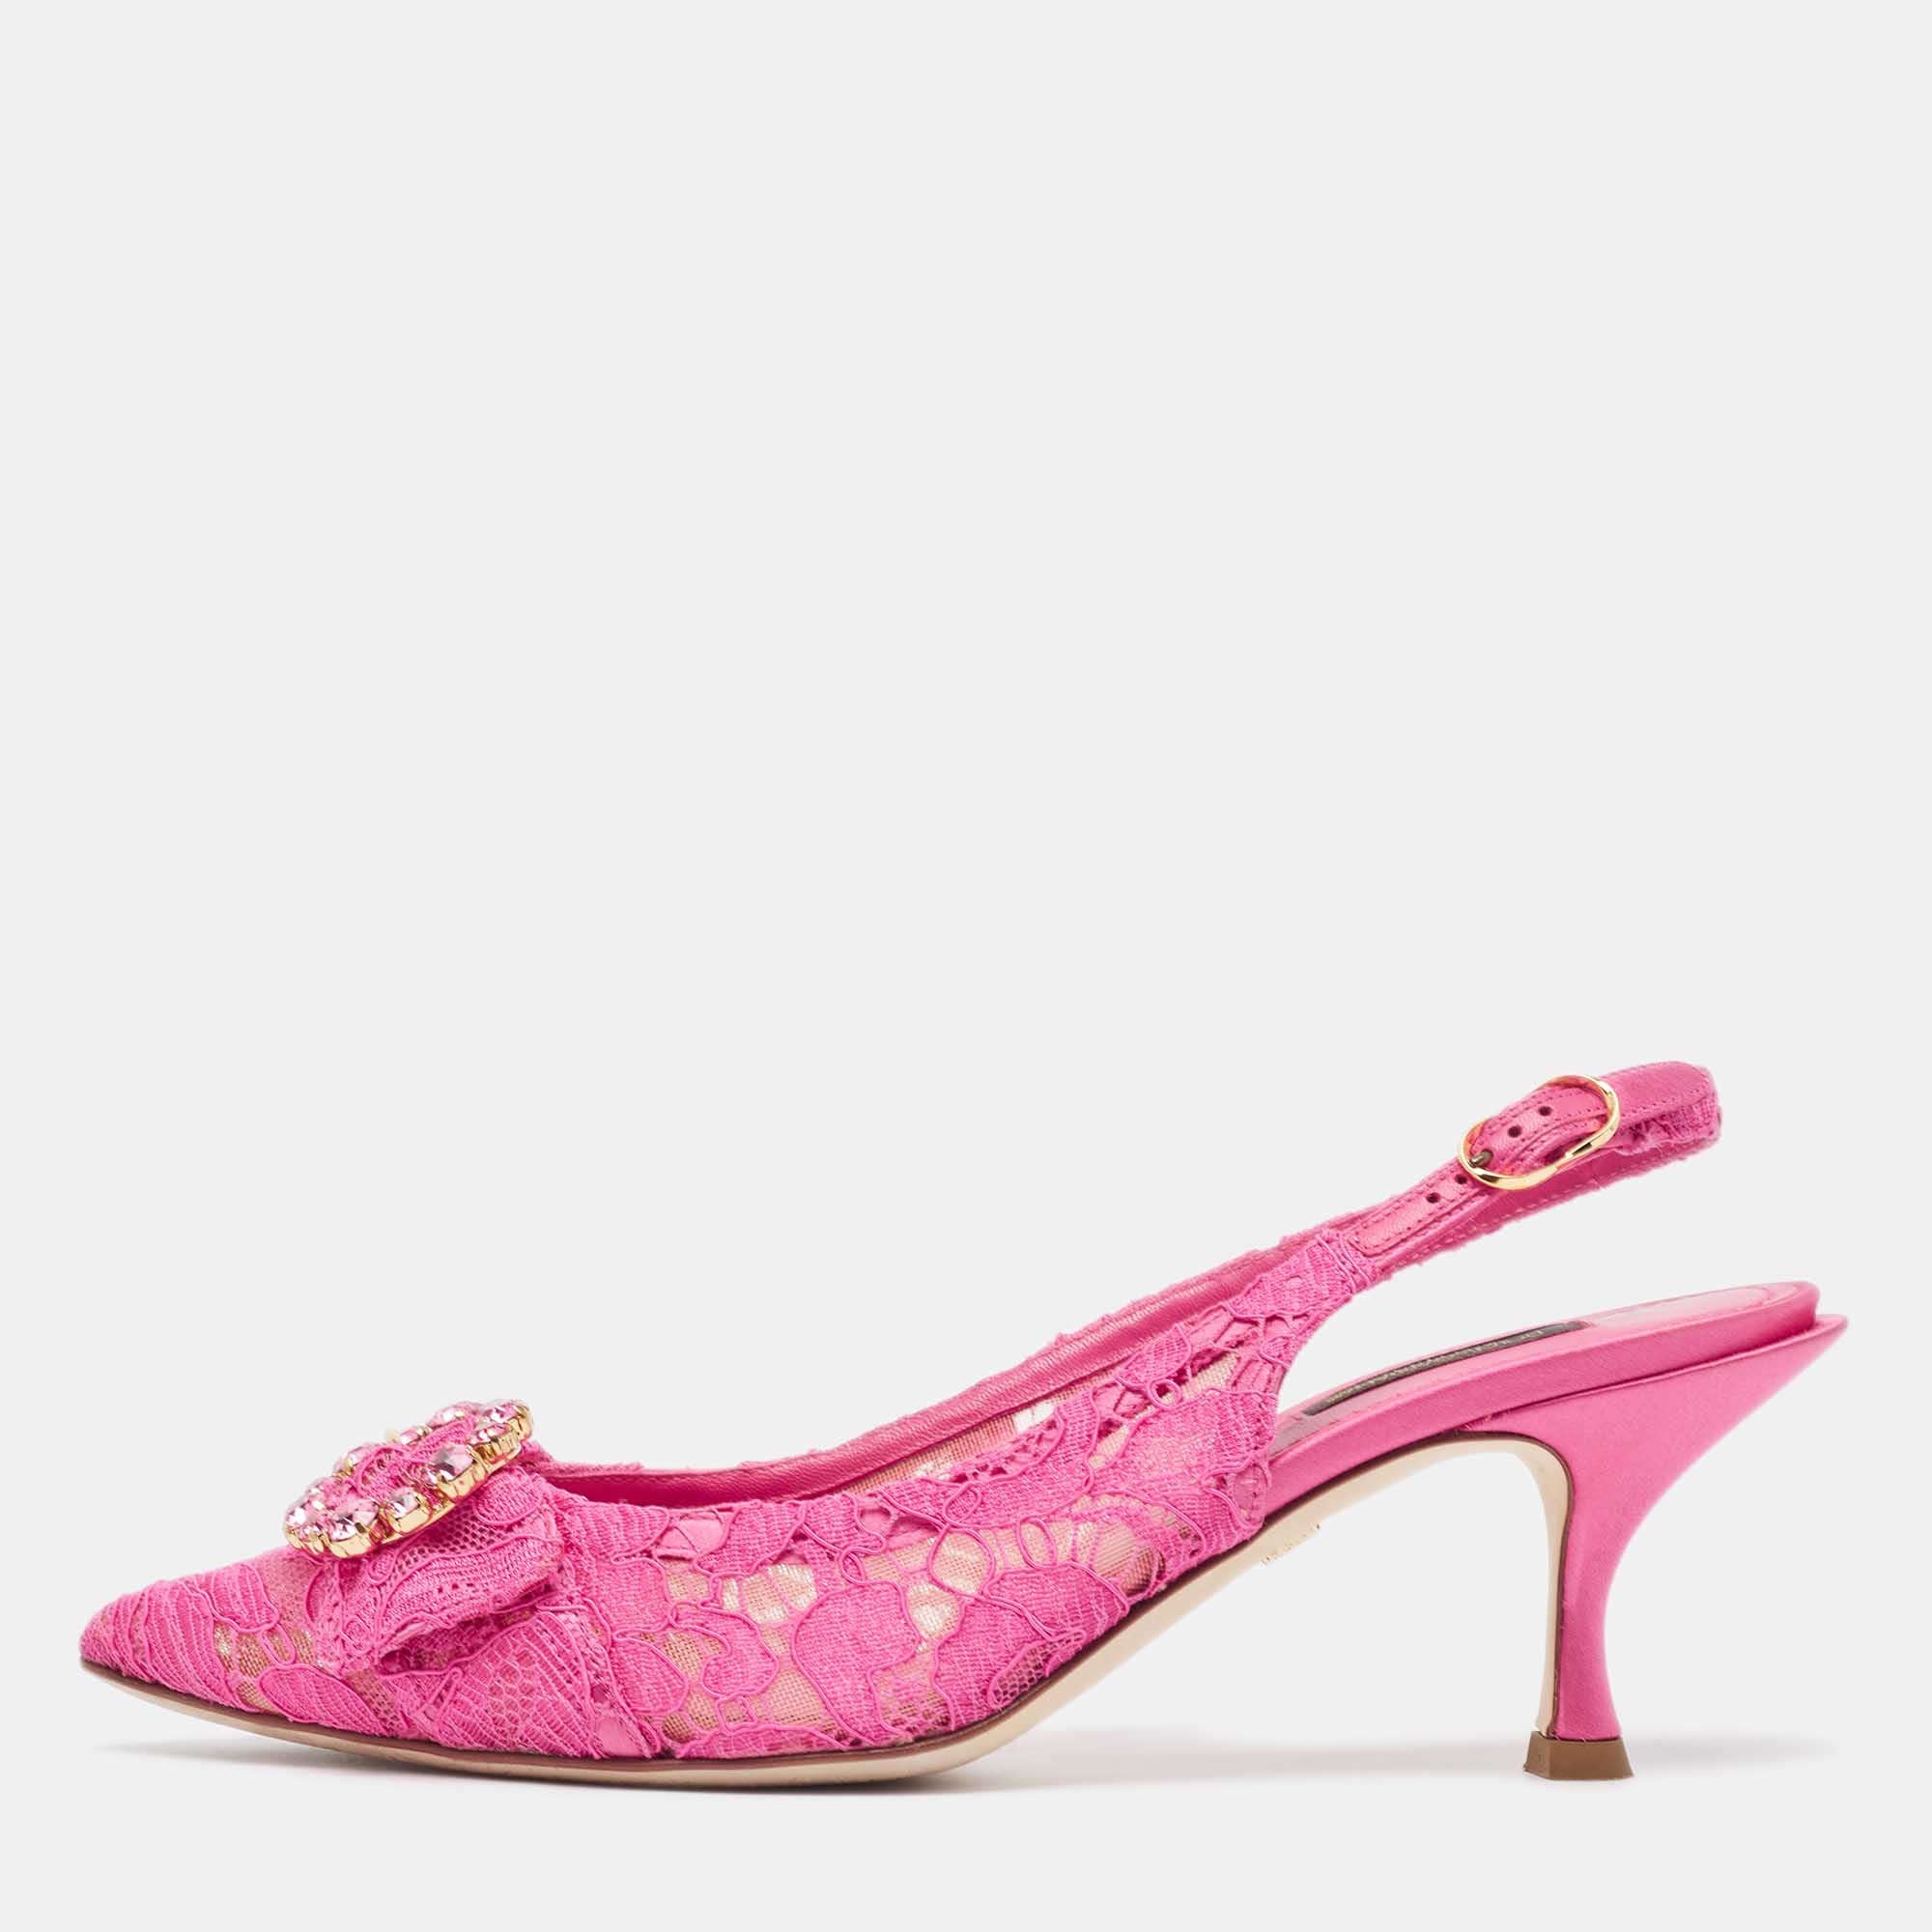 Dolce & gabbana pink lace and mesh bellucci slingback pumps size 38.5